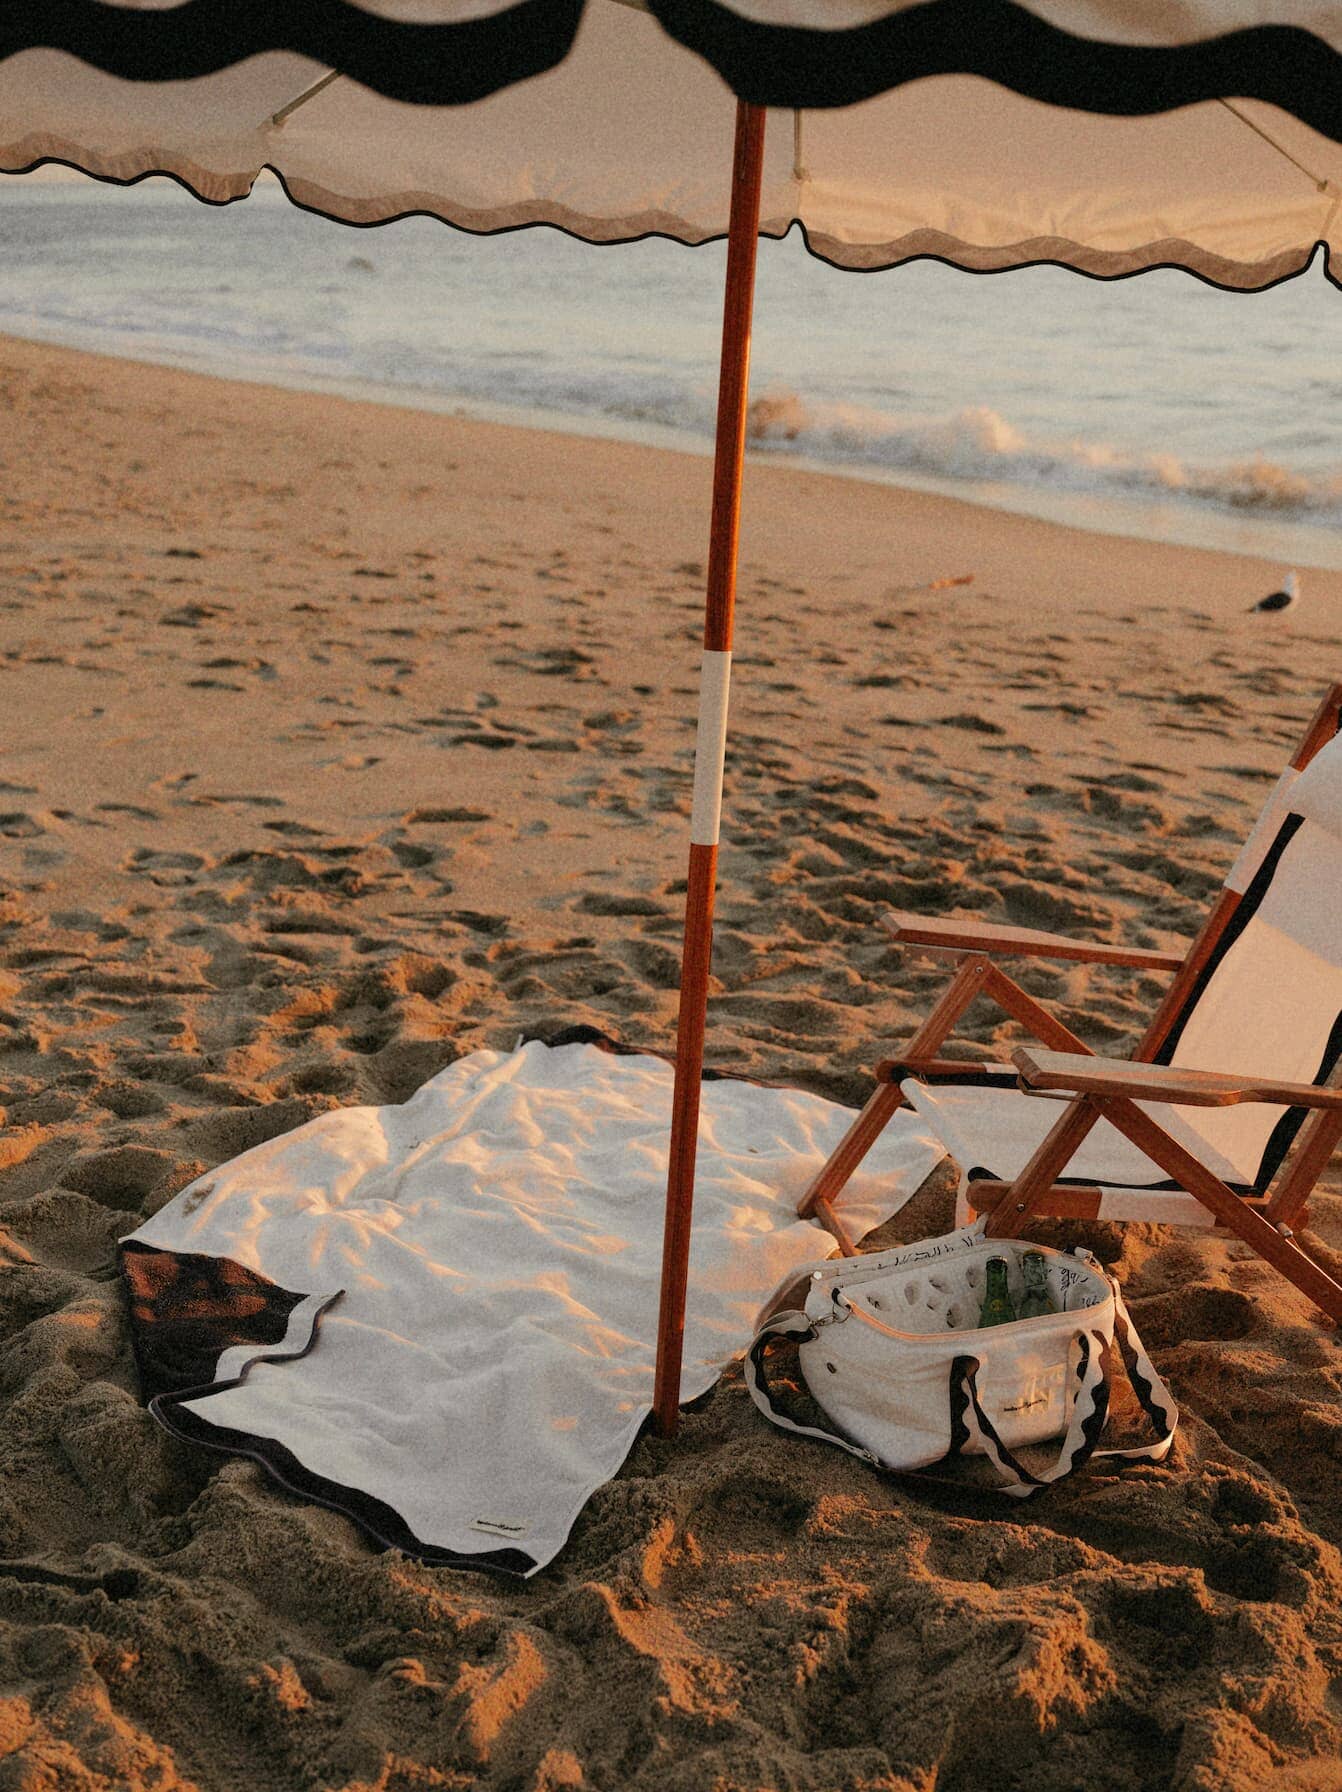 Beach set up with riviera white umbrella, chair, towel and cooler